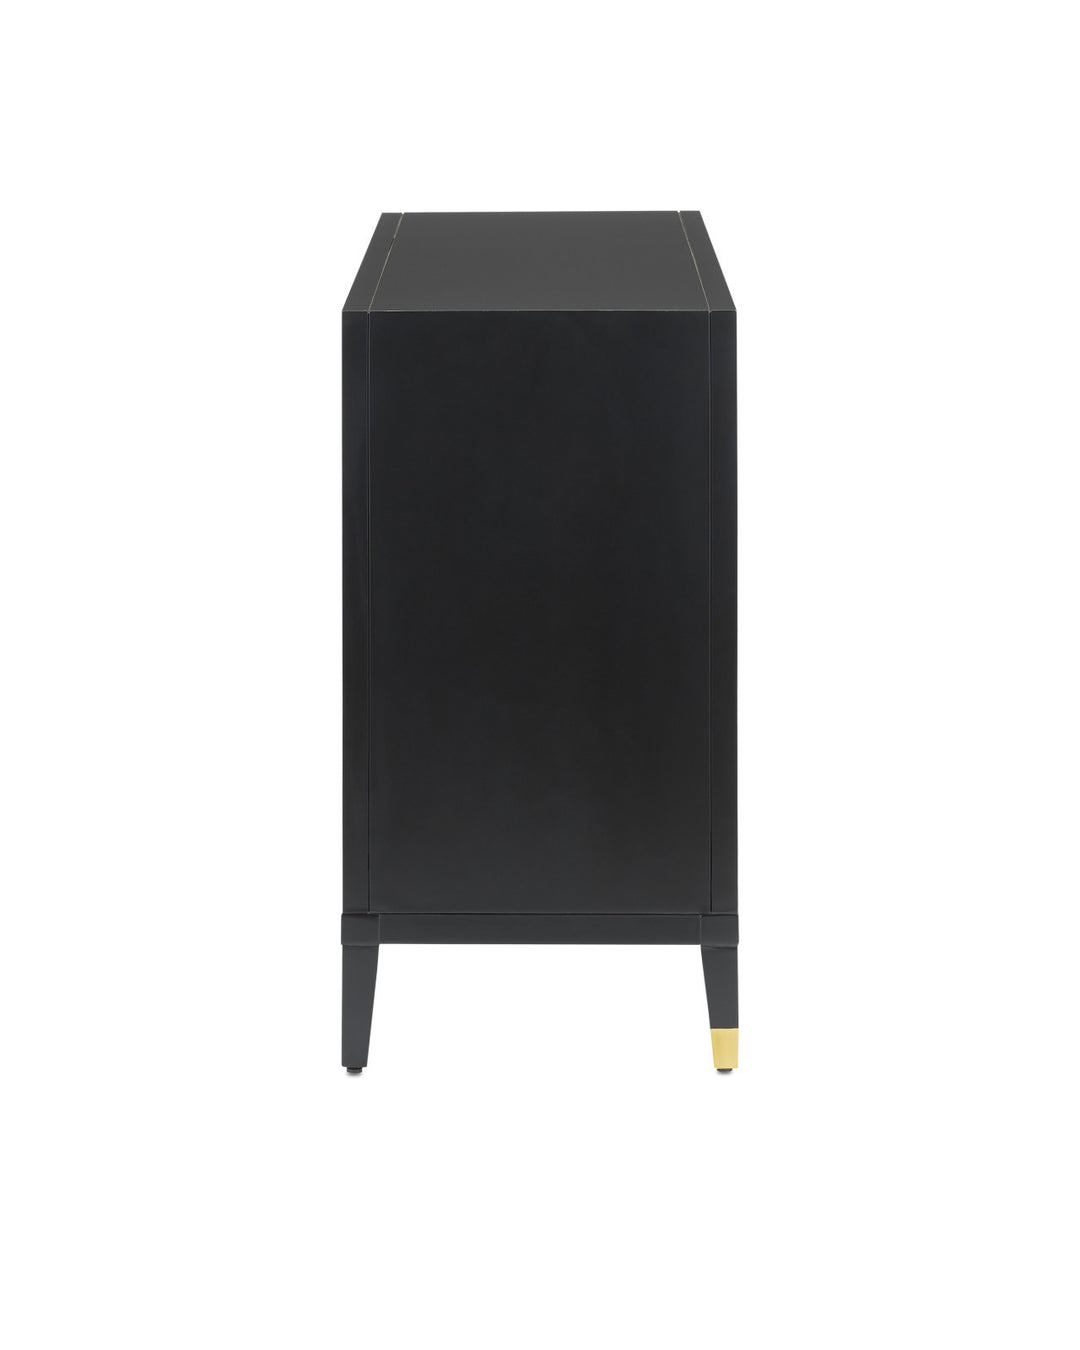 Bramford Black Cabinet by Currey and Company